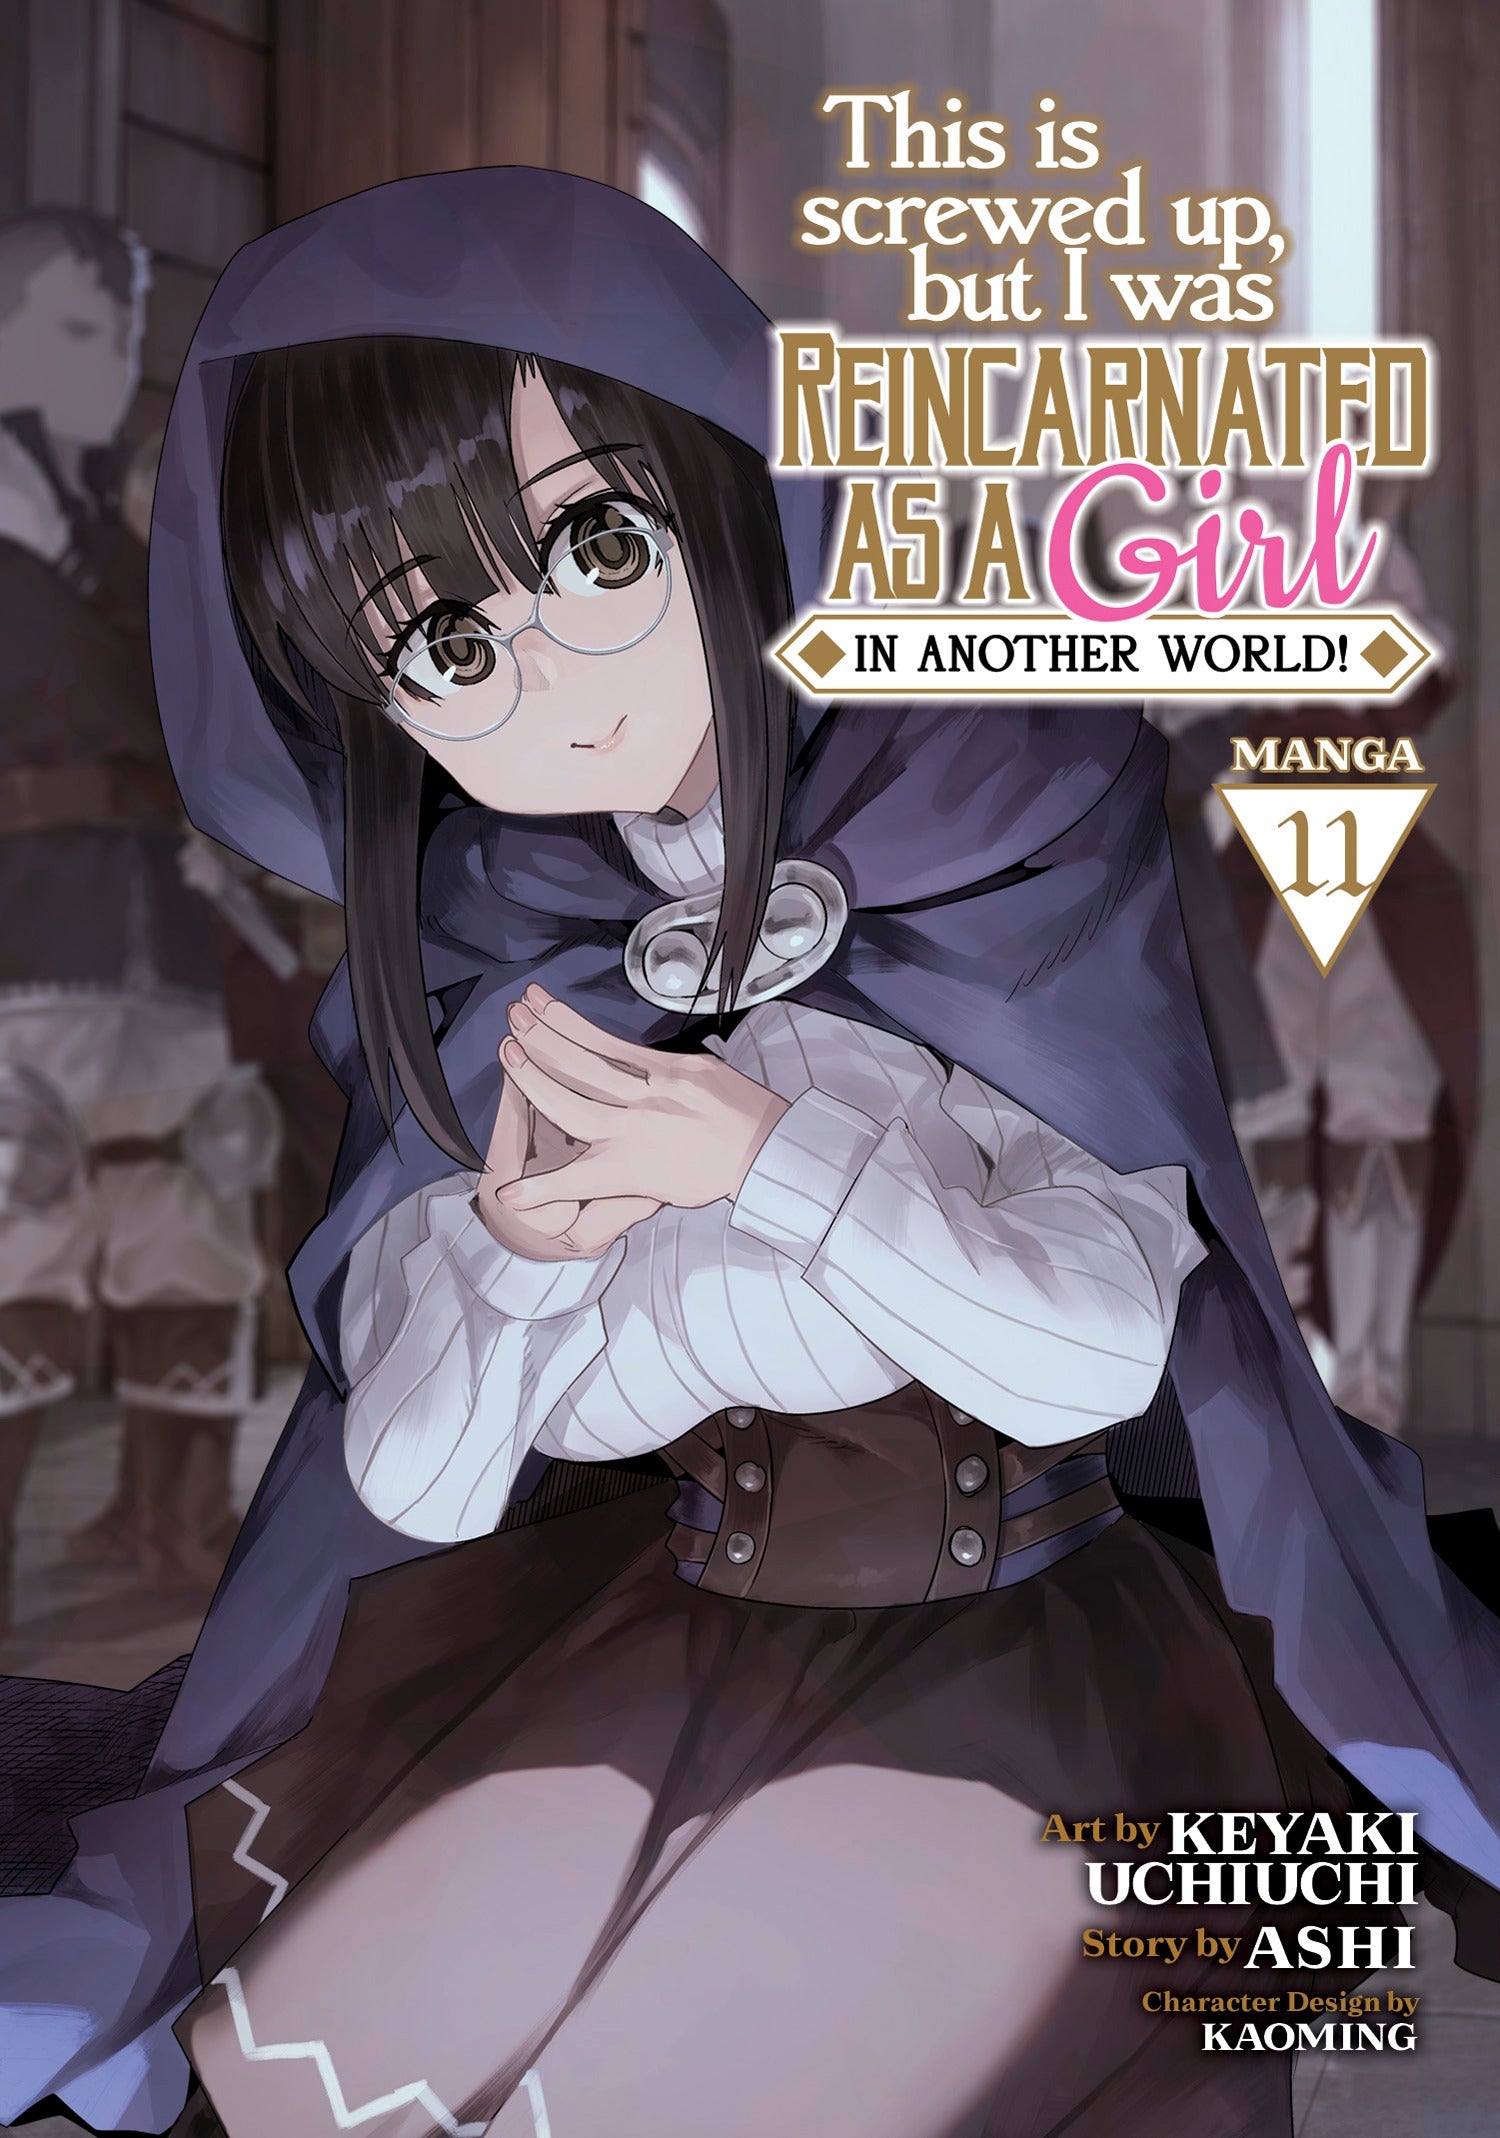 This Is Screwed Up, but I Was Reincarnated as a GIRL in Another World! (Manga), Vol. 11 **Pre-Order**